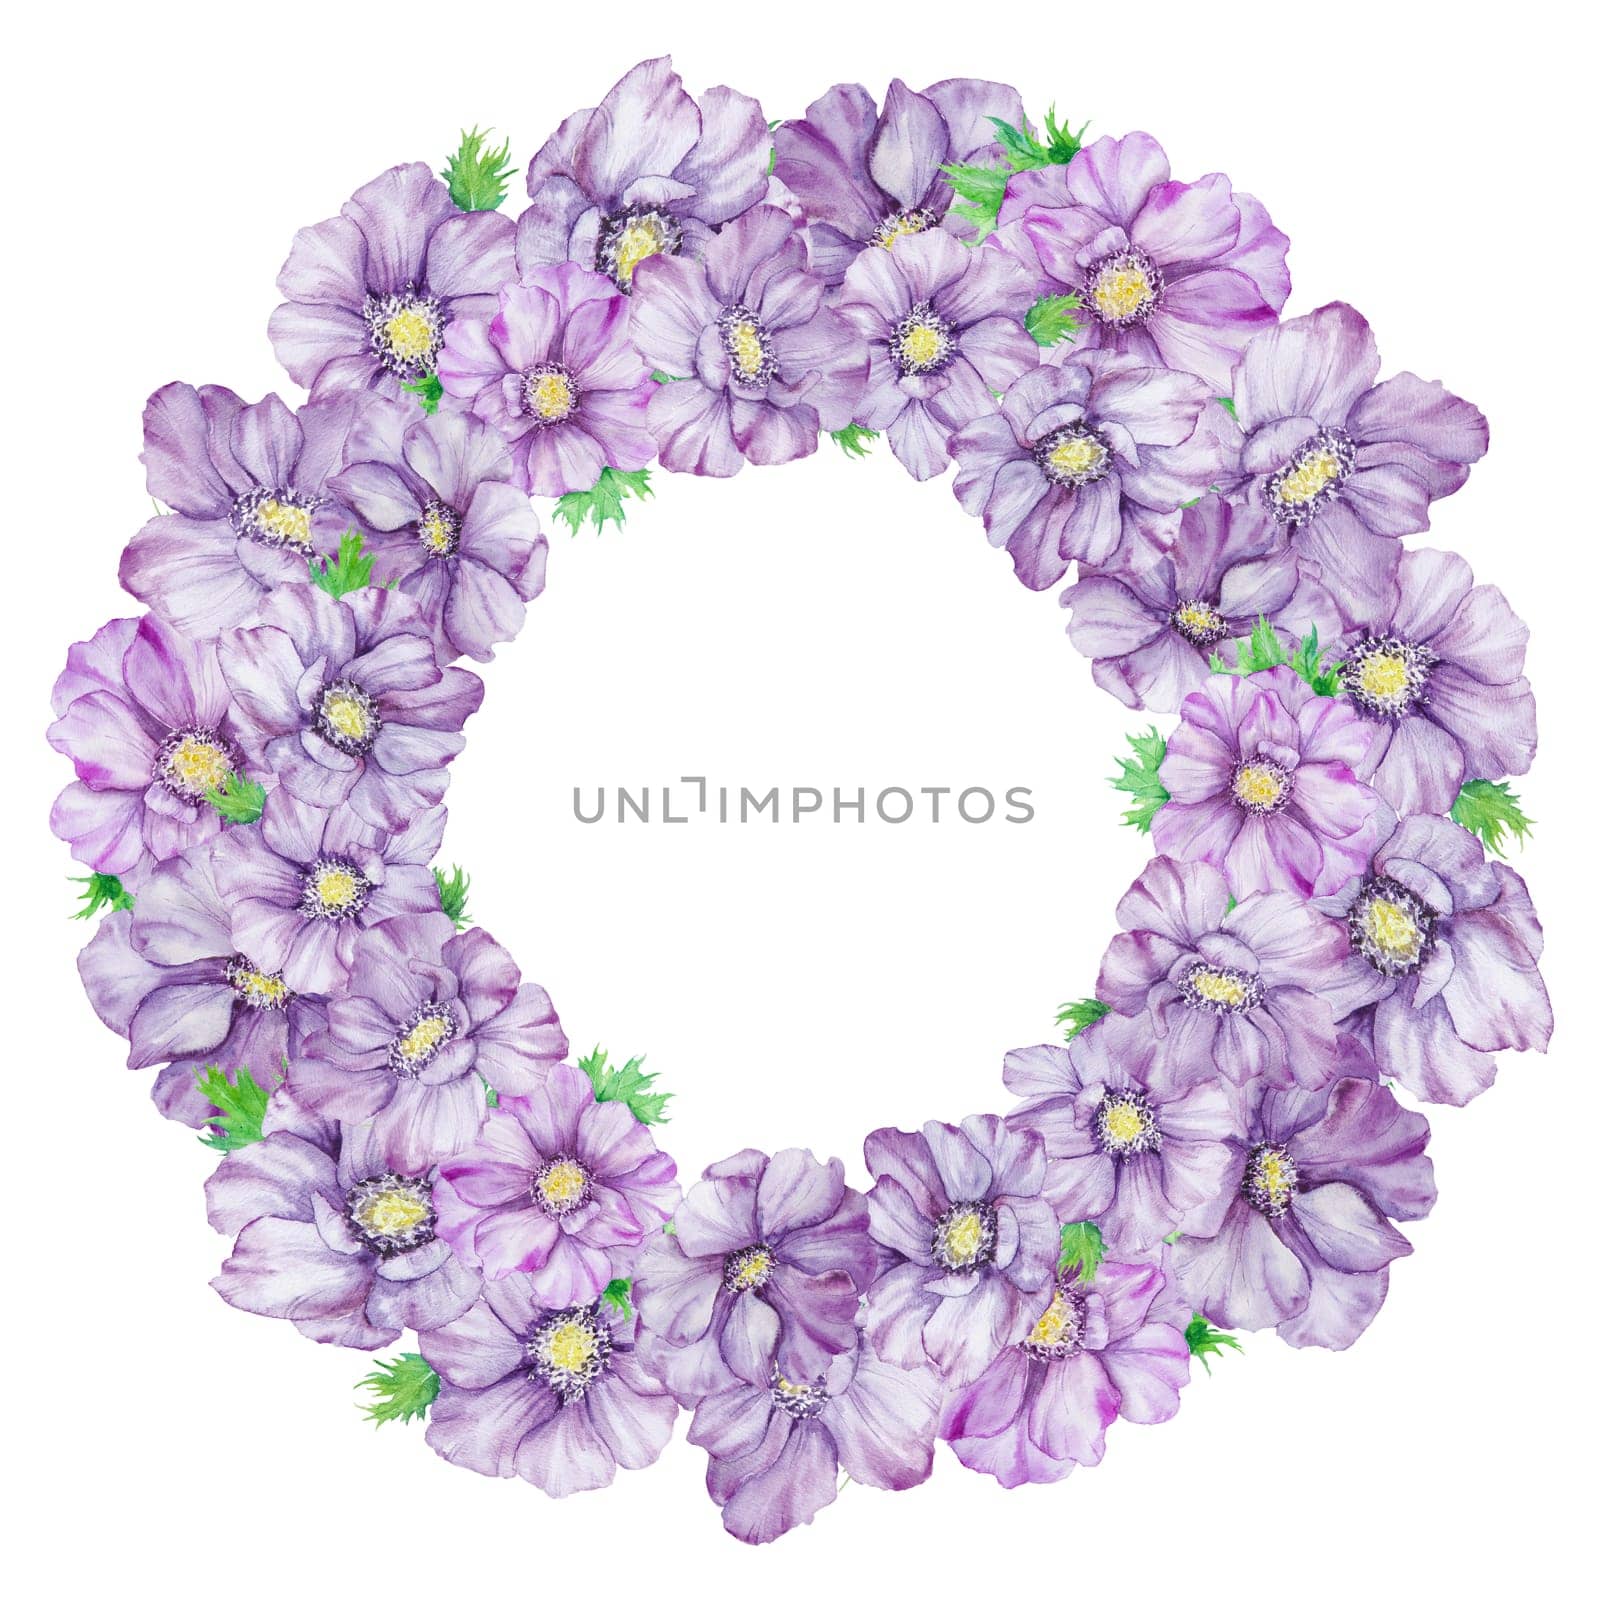 Watercolor hand drawn wreath of purple anemones with green leaves isolated on white background. by florainlove_art